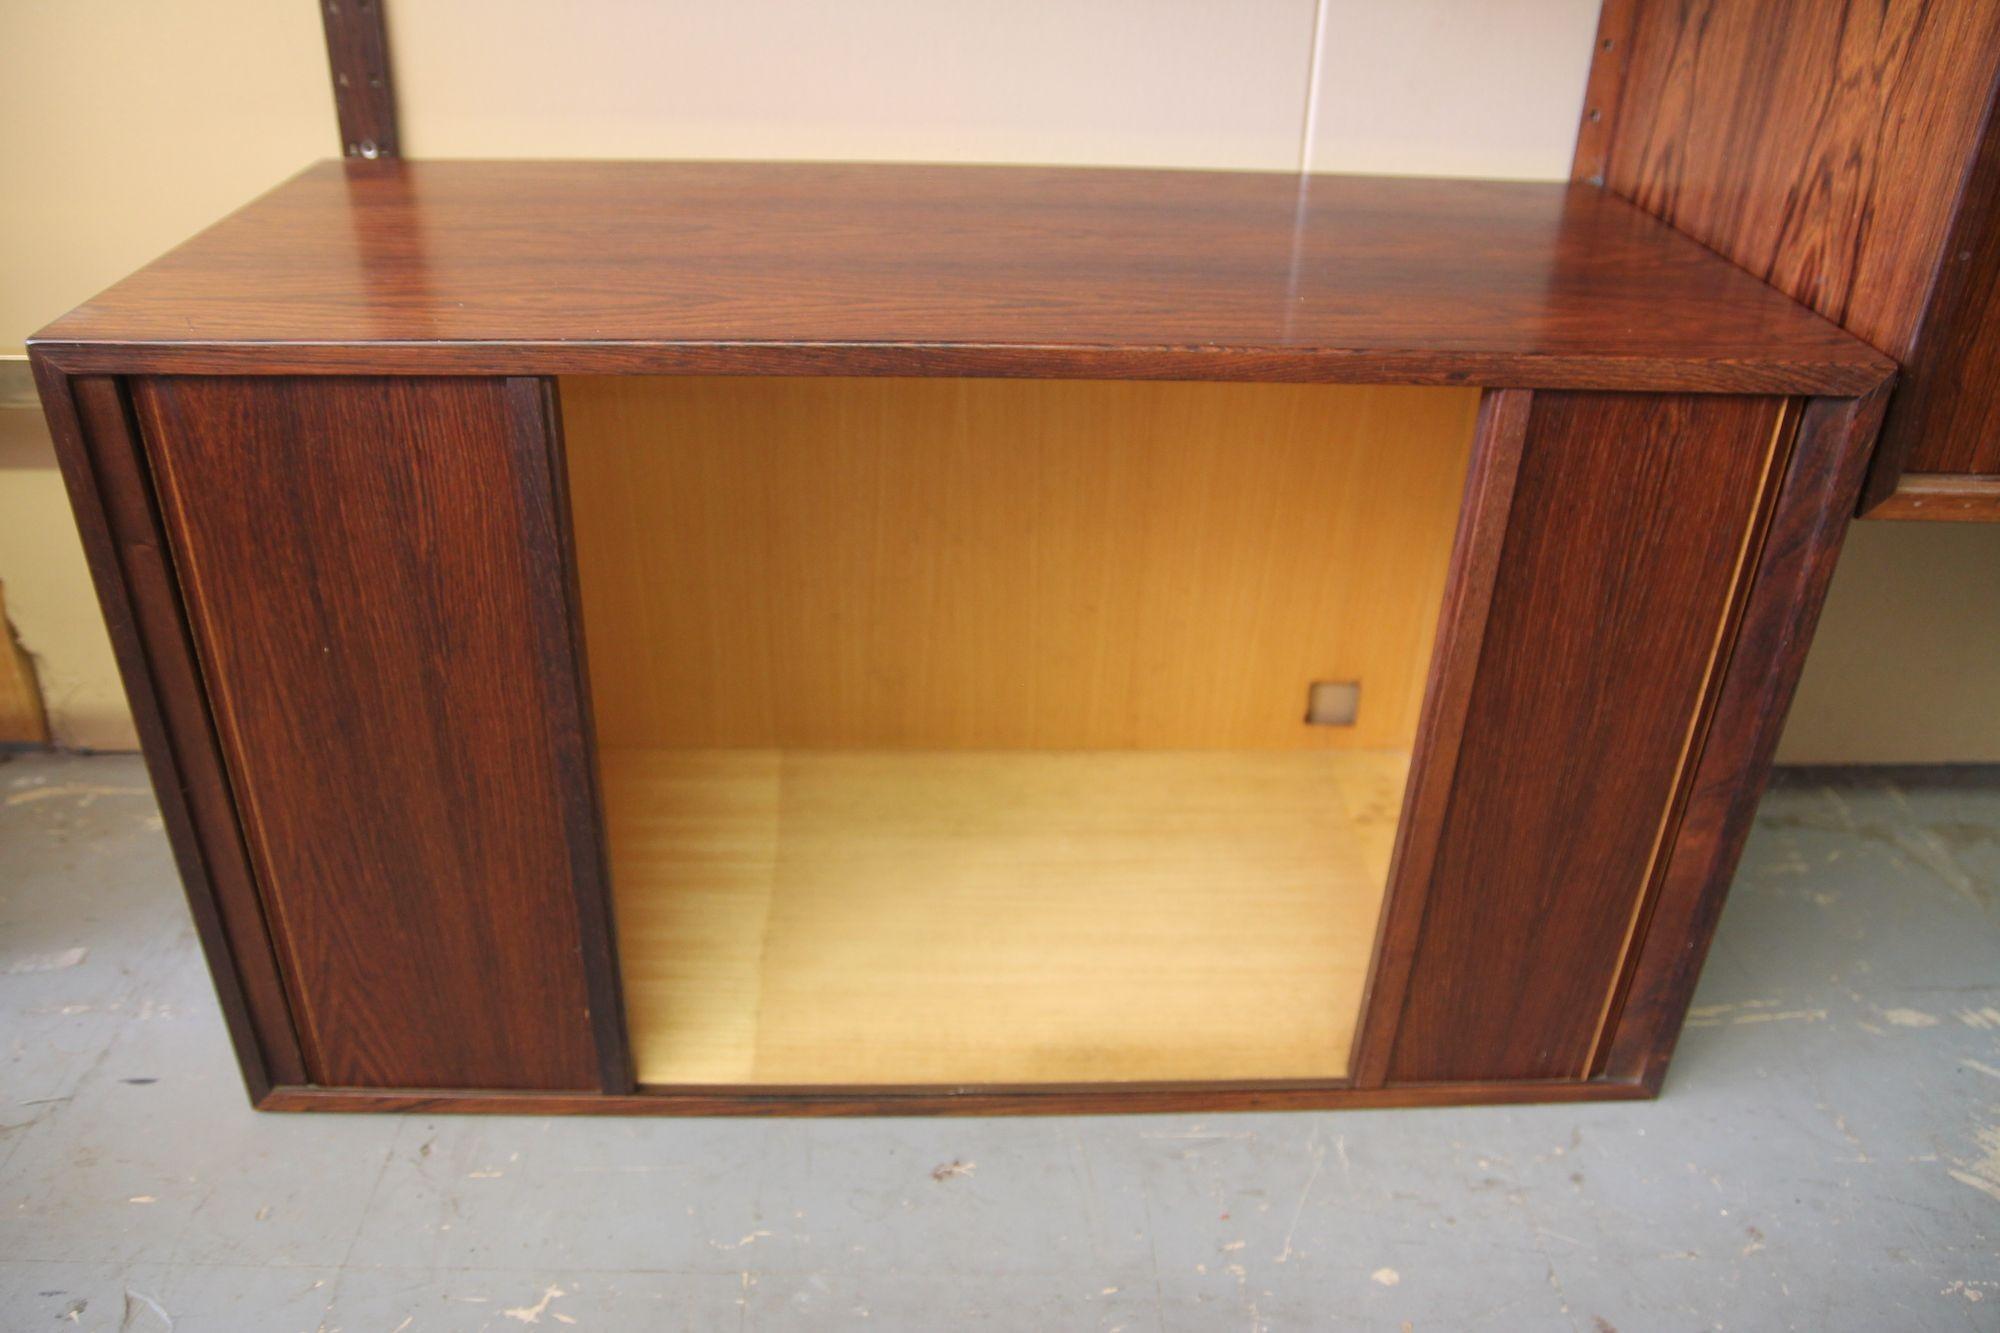 Rosewood 2 bay Cado wall unit imported by Raymor 1